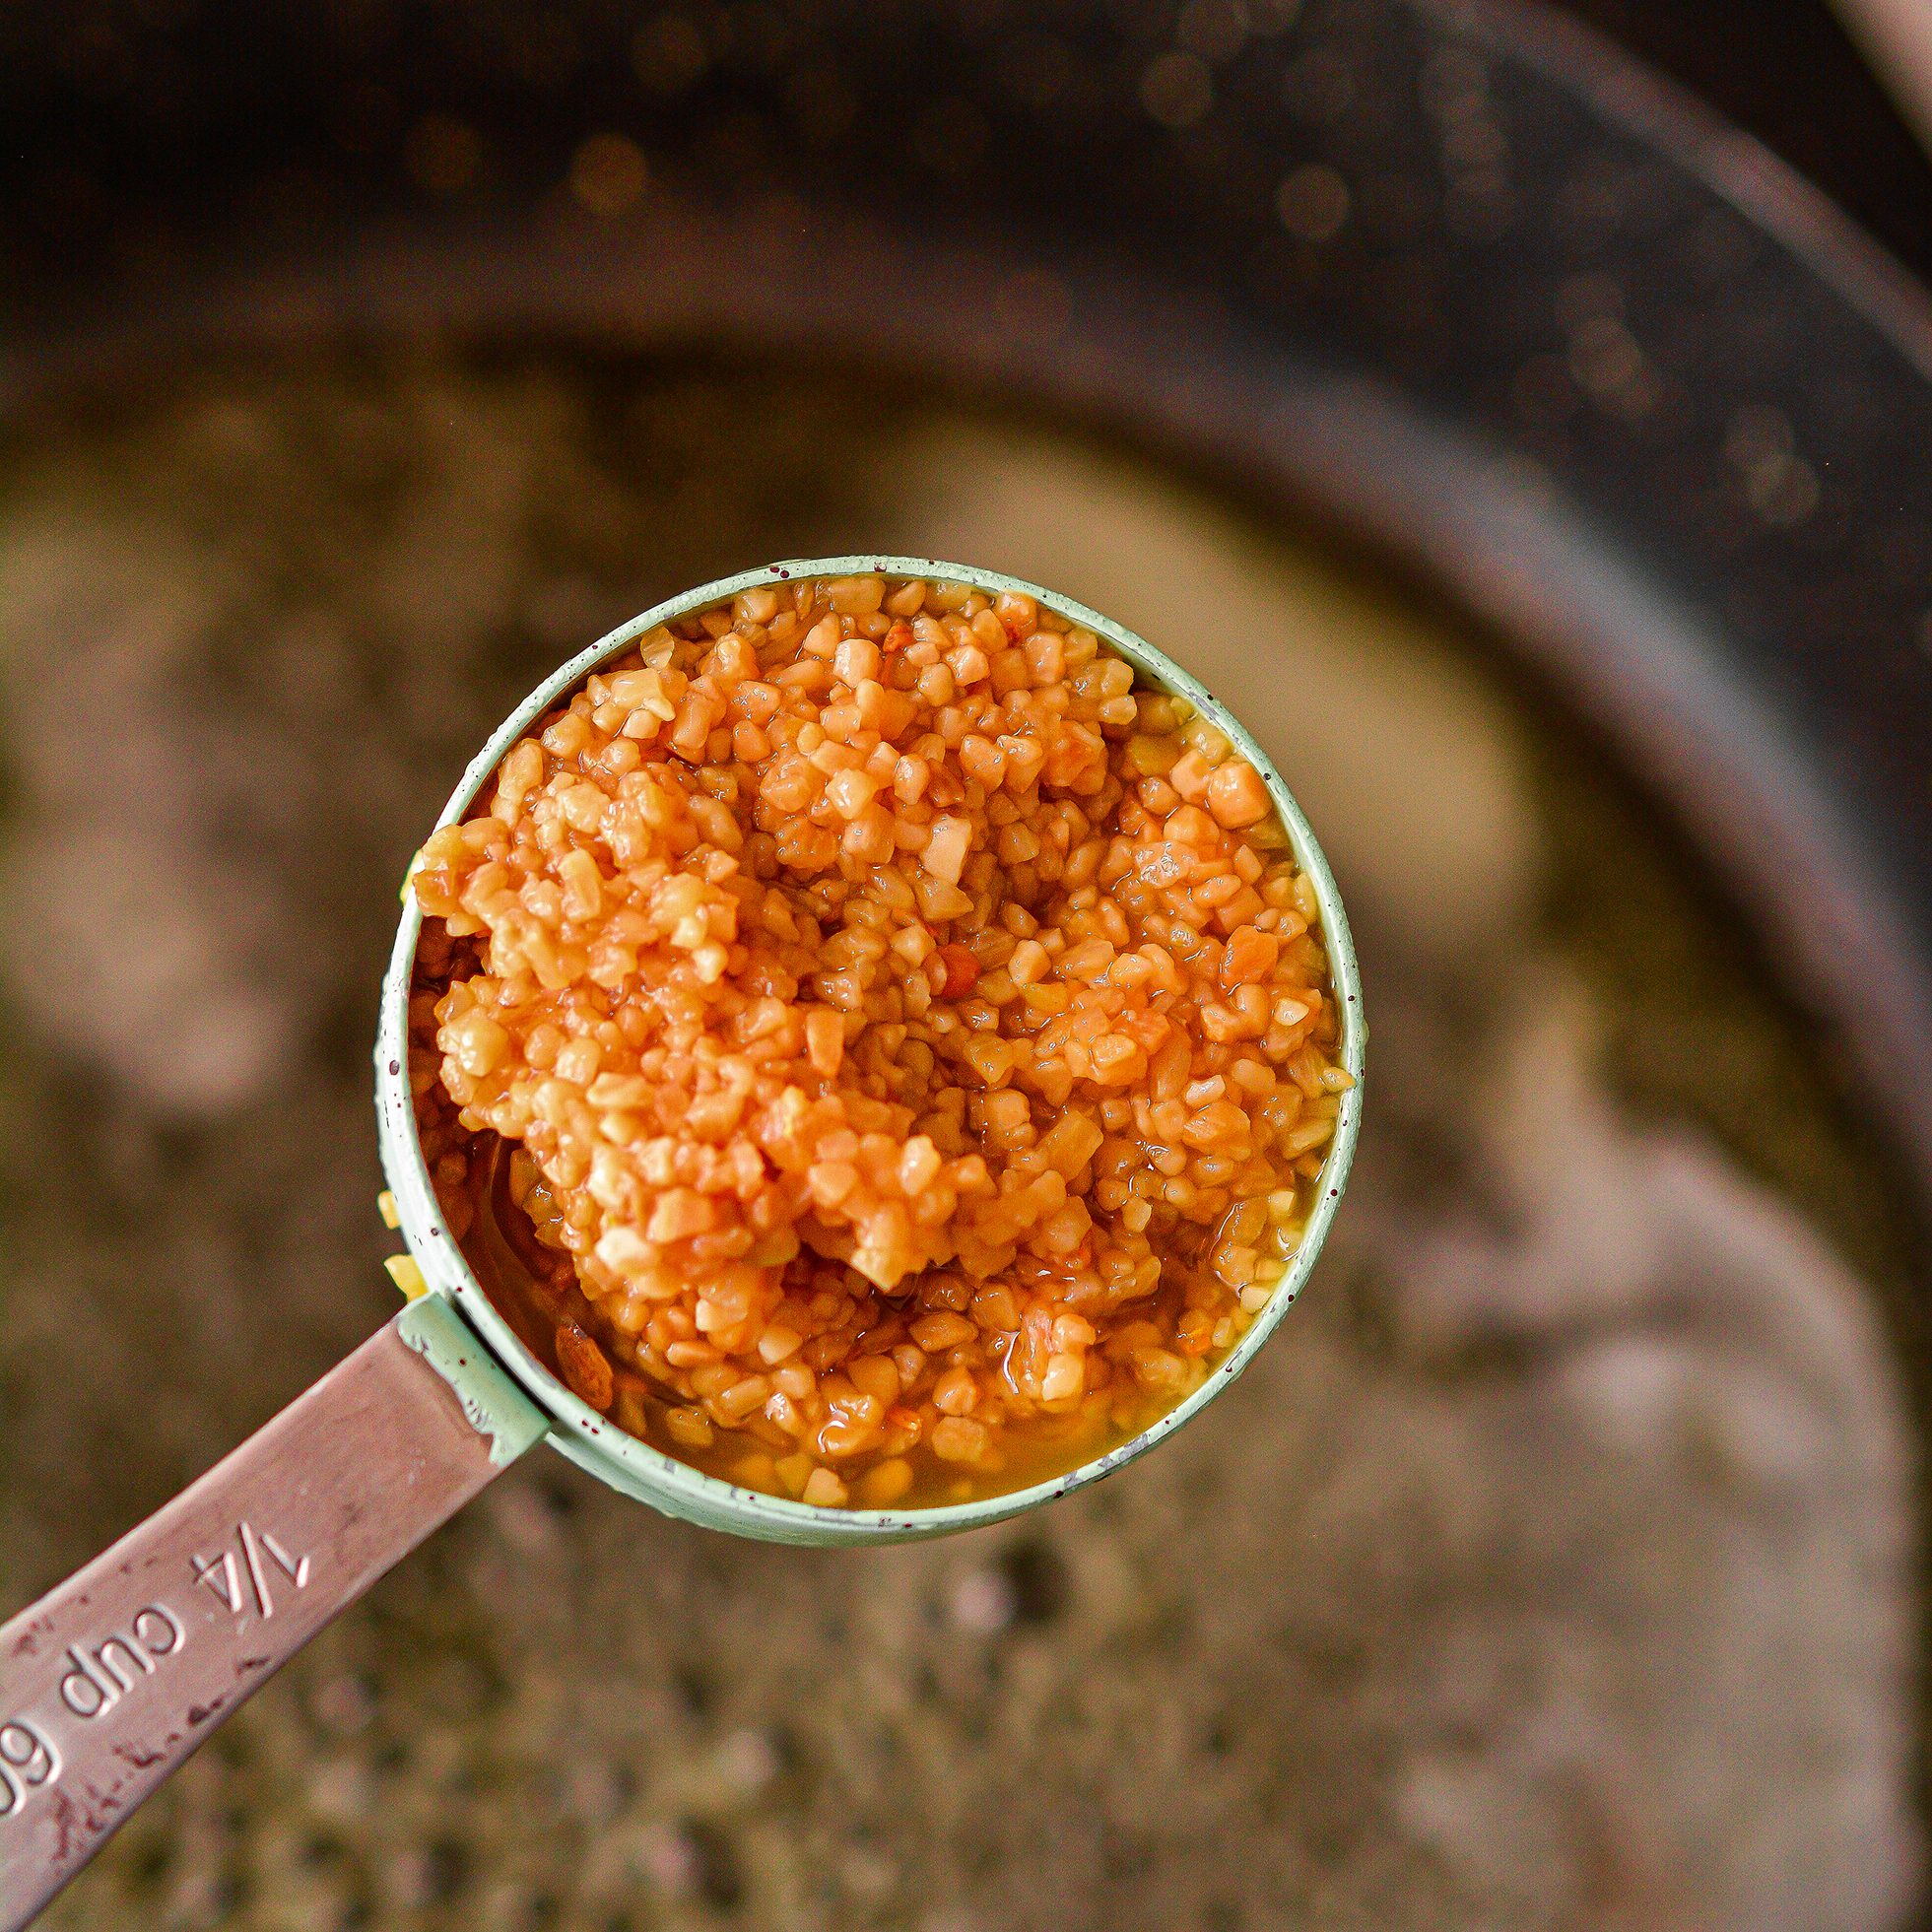  Stir the minced garlic into the skillet and saute for a minute.